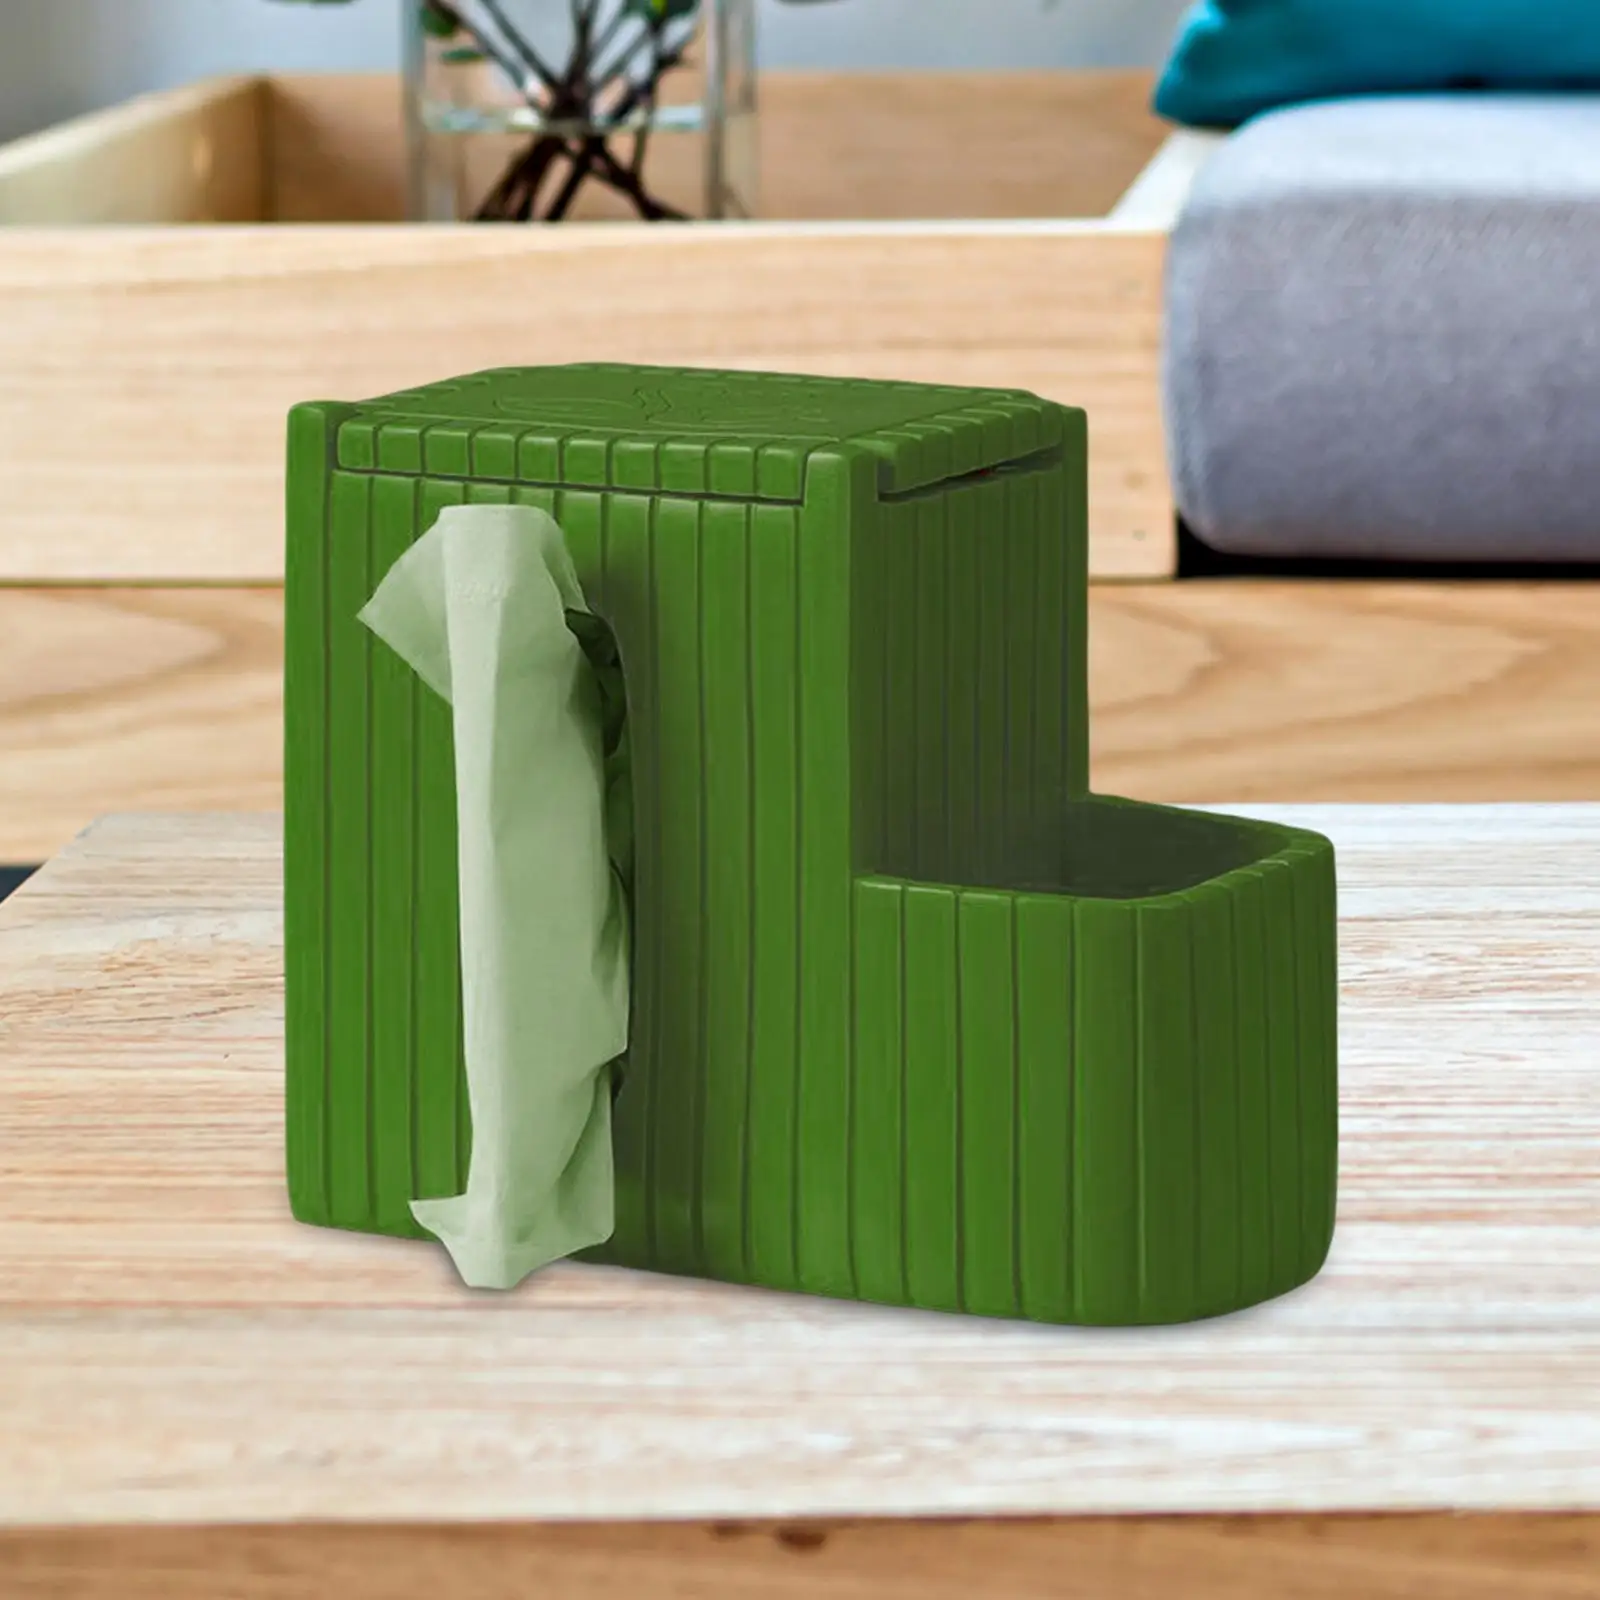 Tissue Box Holder with Stationery Remote Control Box for Bedroom Craft Room